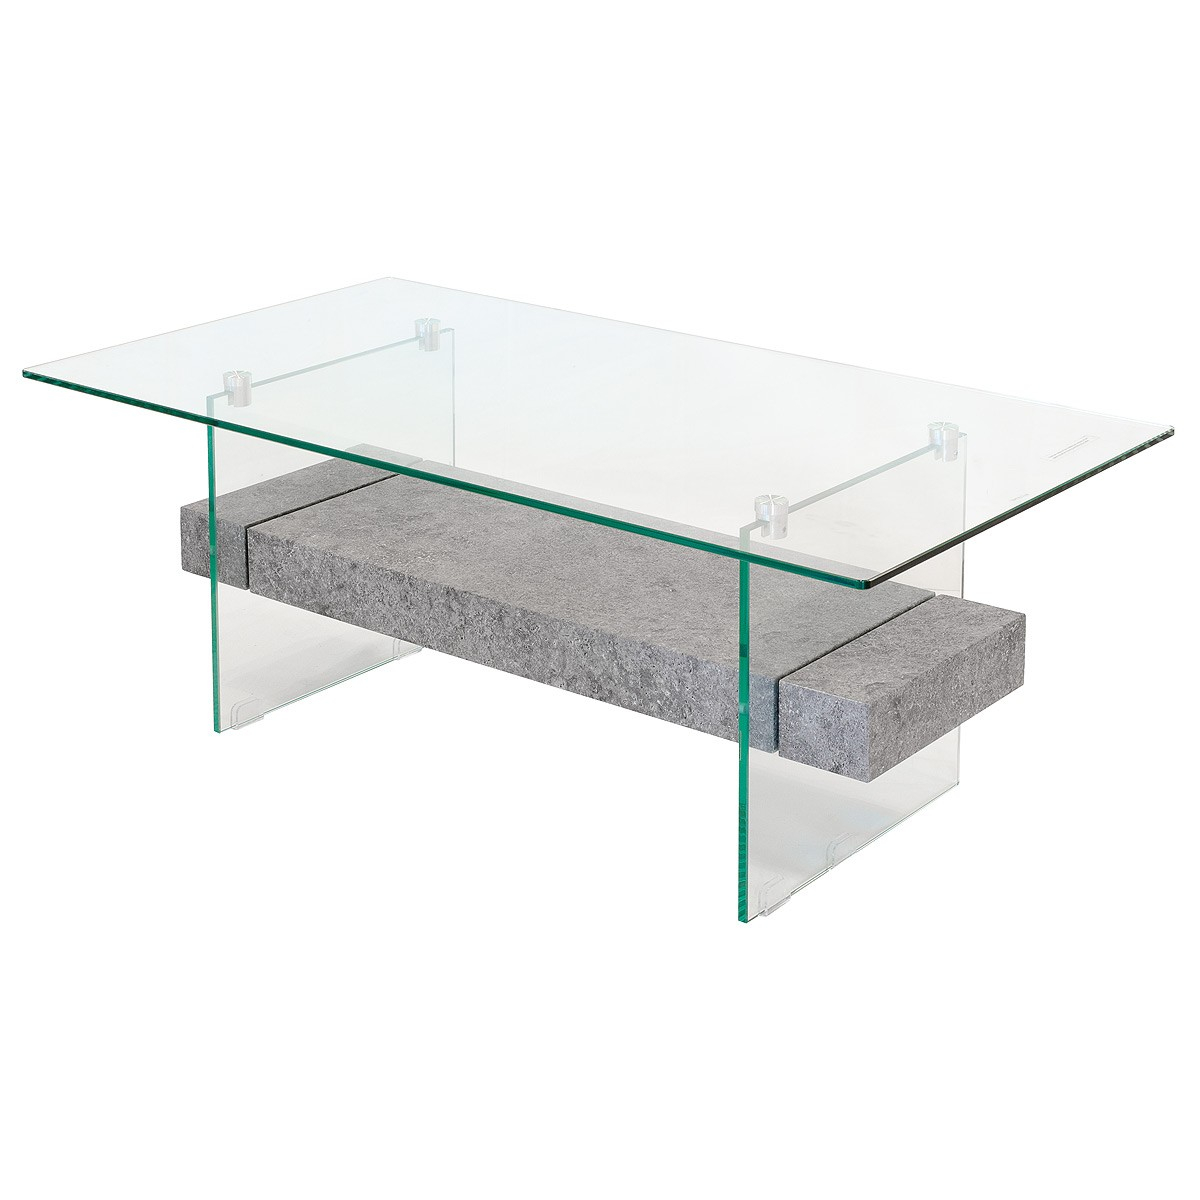 Stone Effect Glass Coffee Table Be Fabulous within size 1200 X 1200